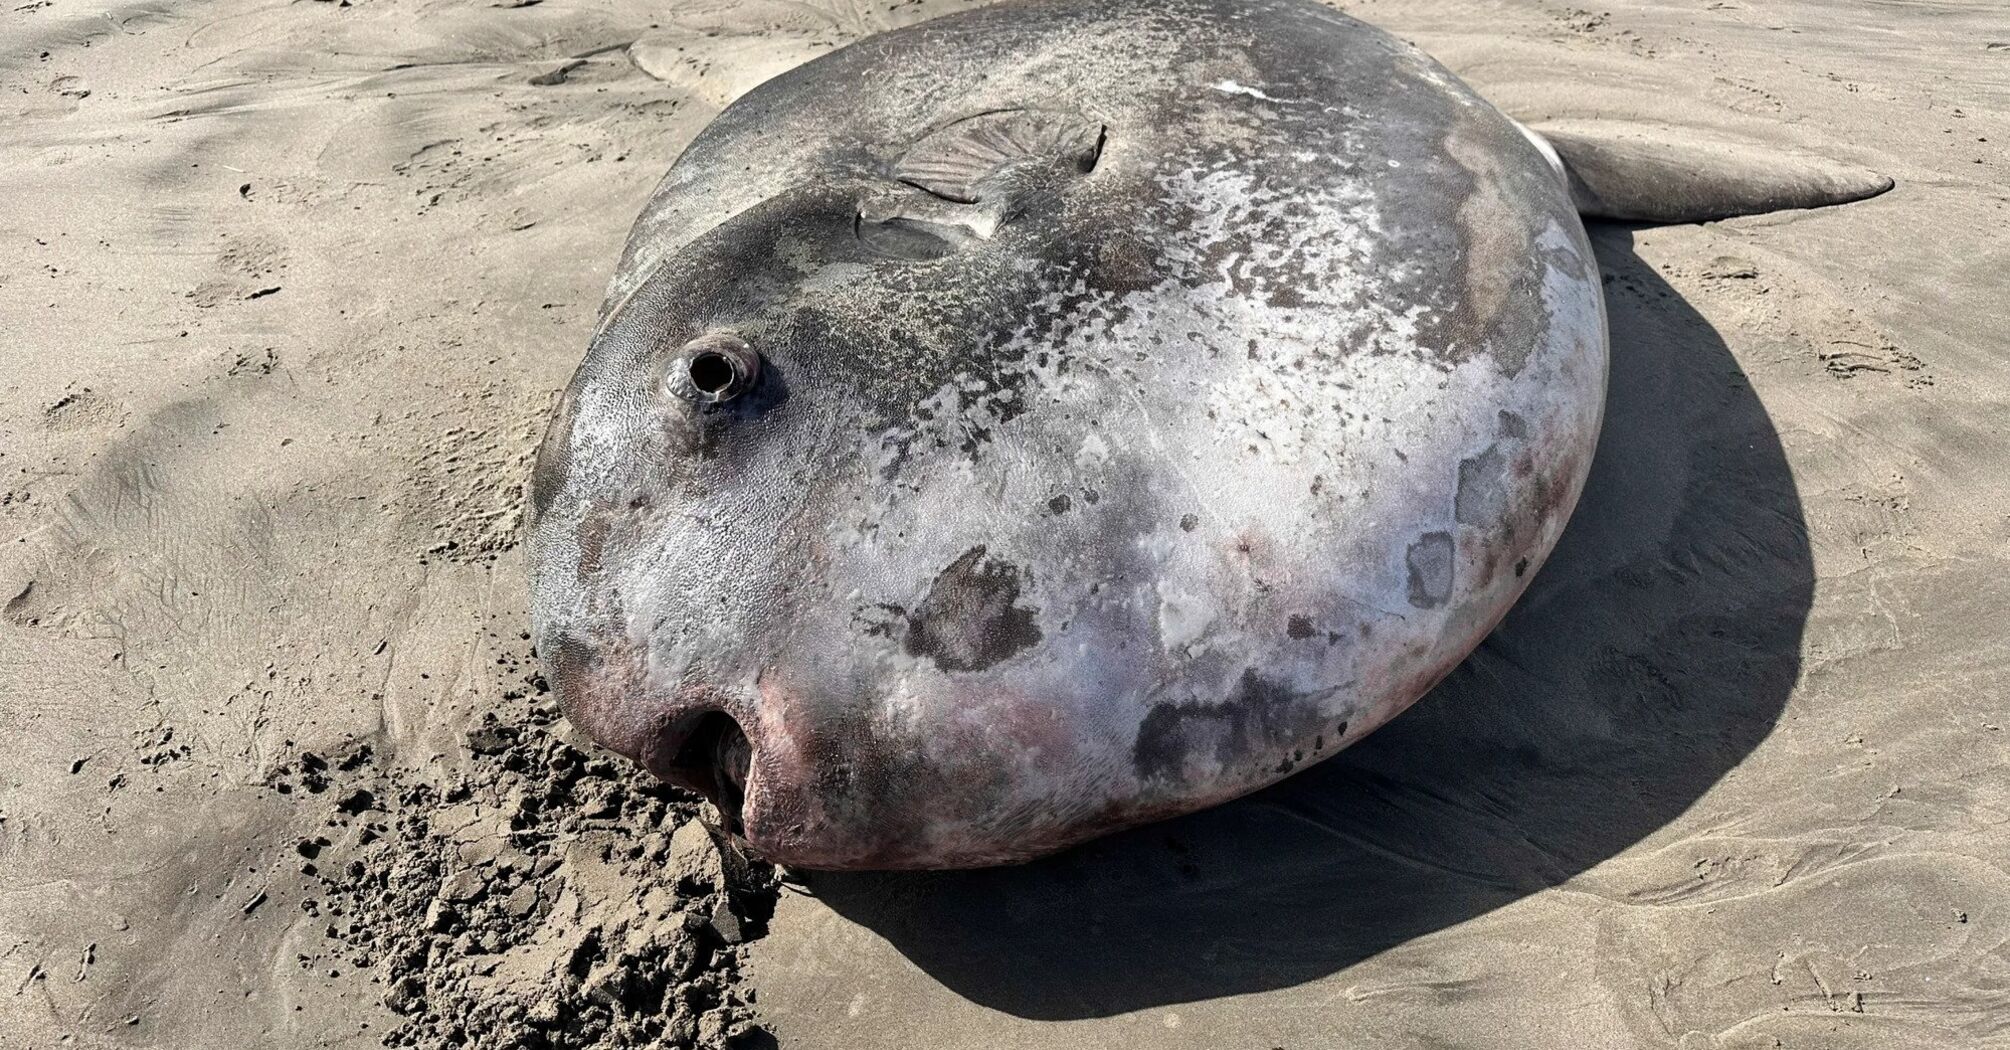 A 7-foot fish washed ashore in Oregon